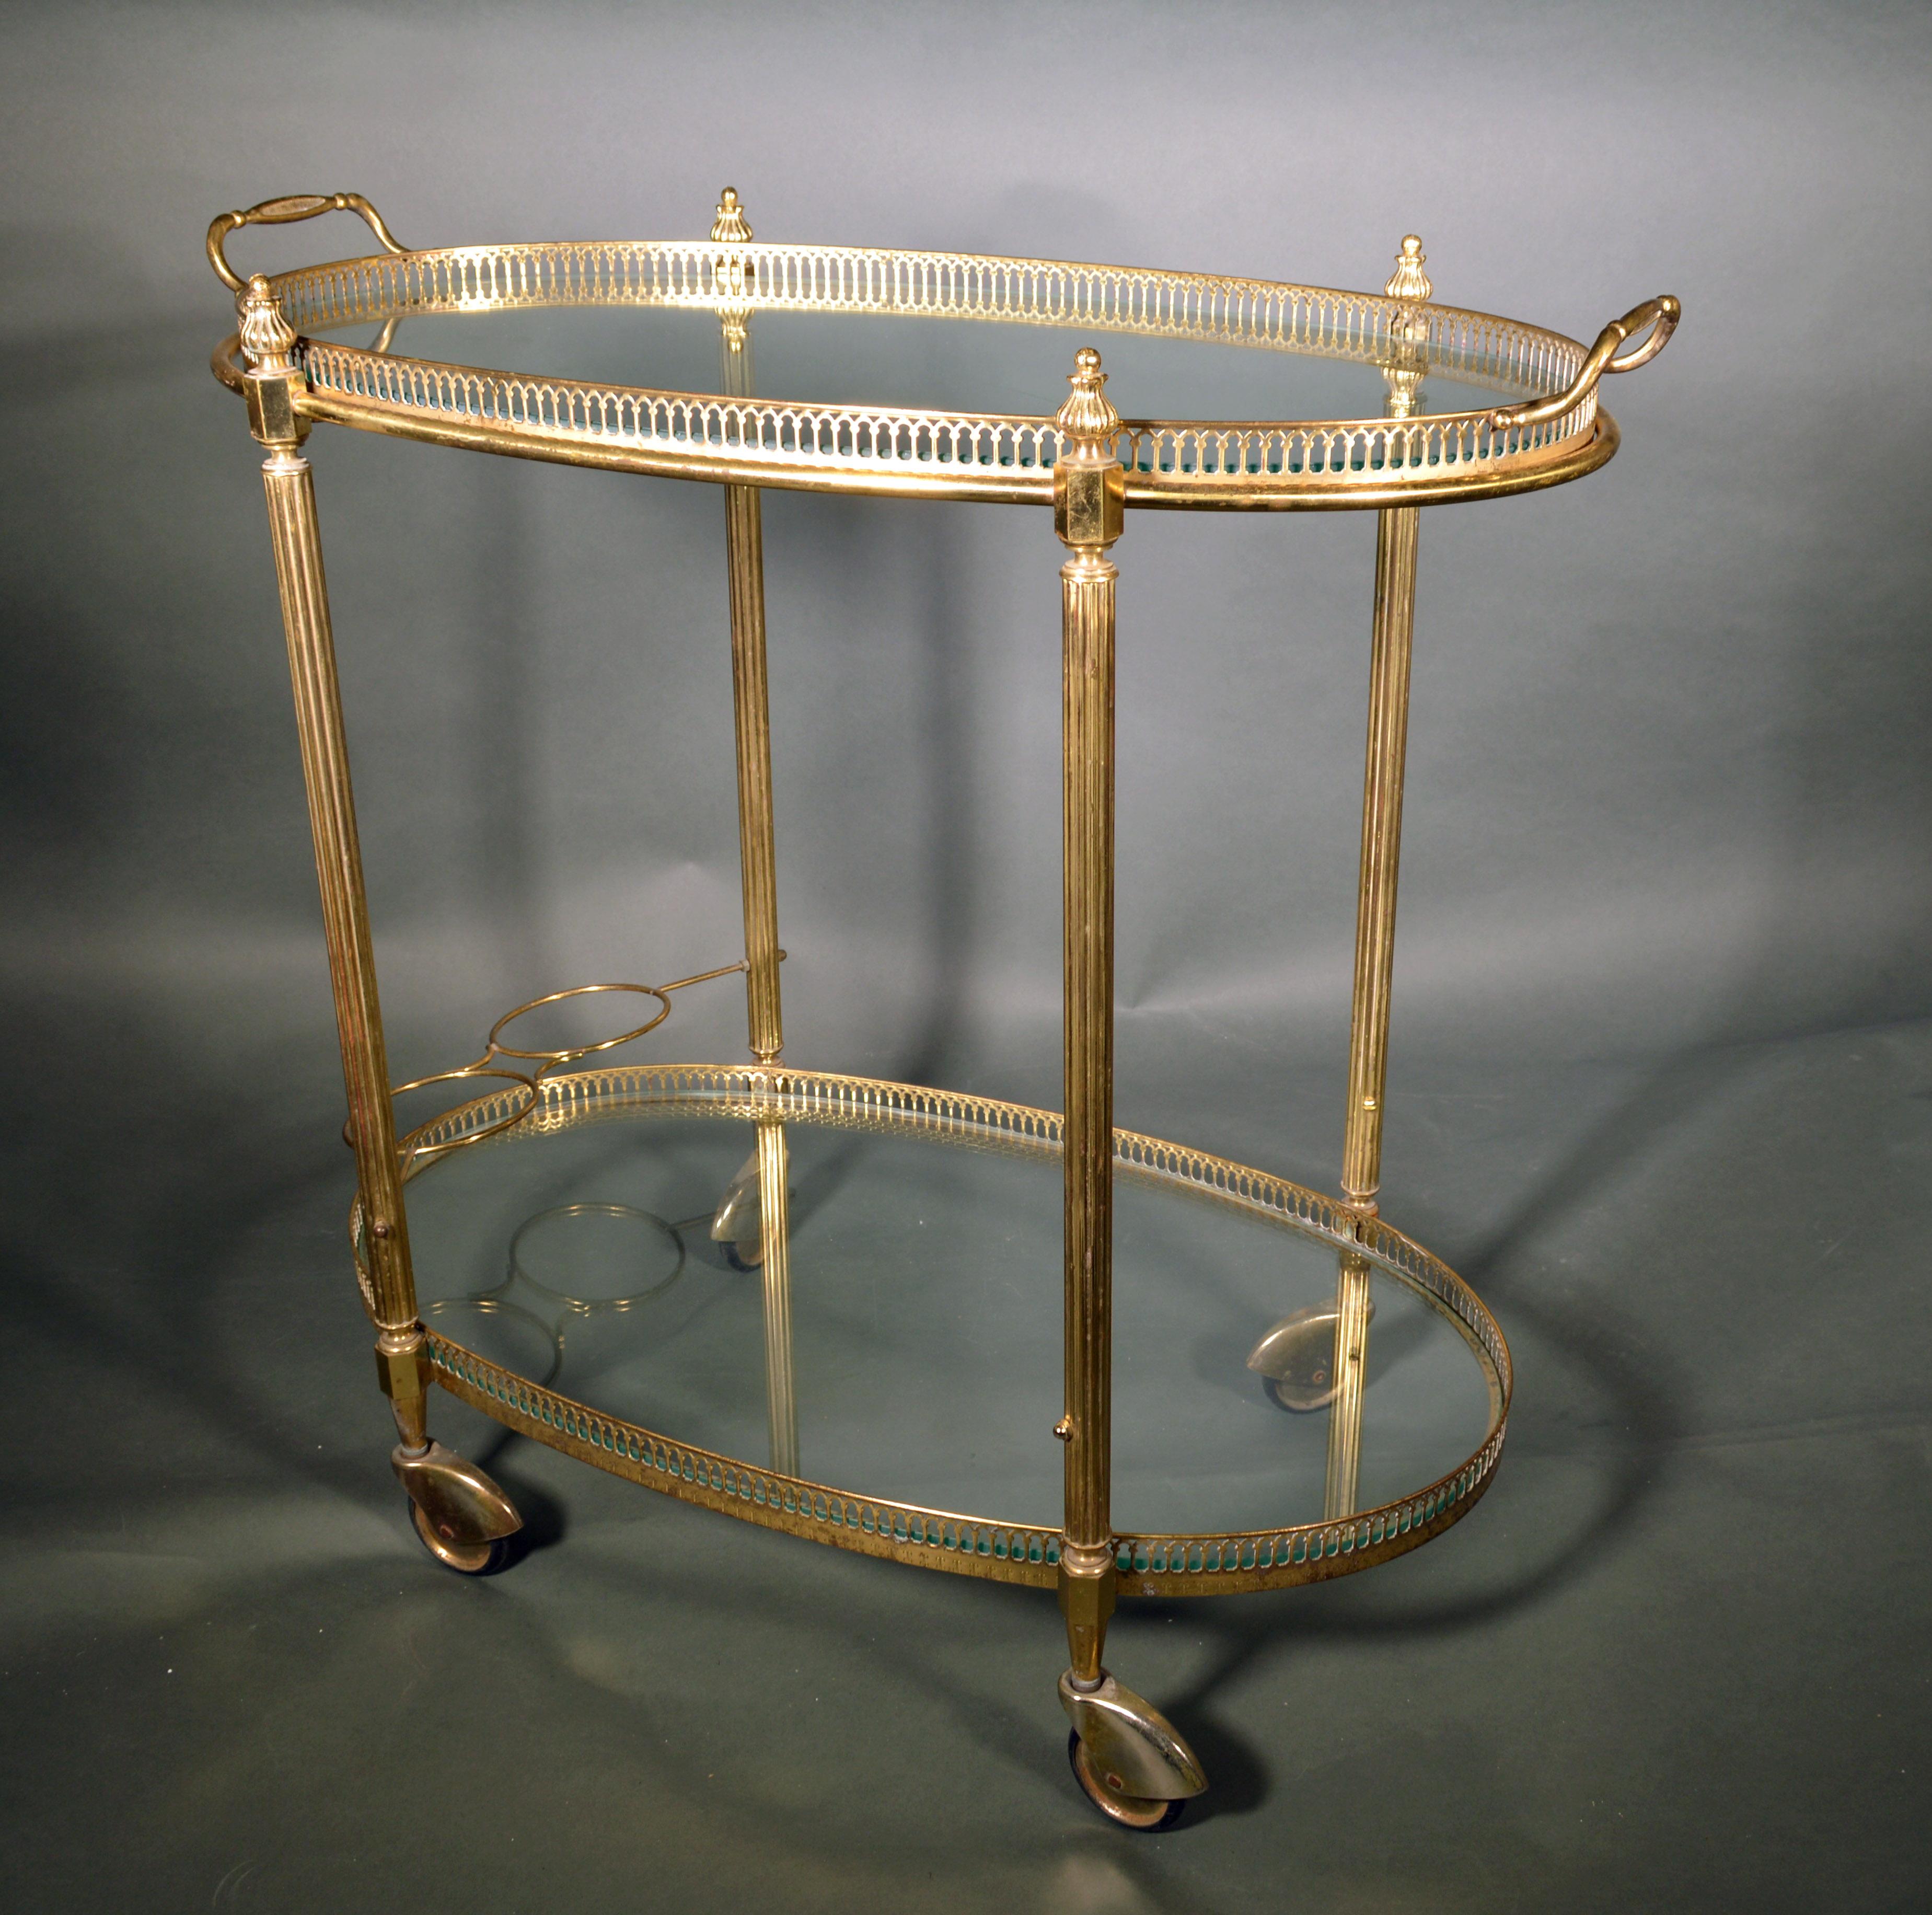 20th Century Mid-Century Modern French Brass and Glass Bar Cart, the 1950s